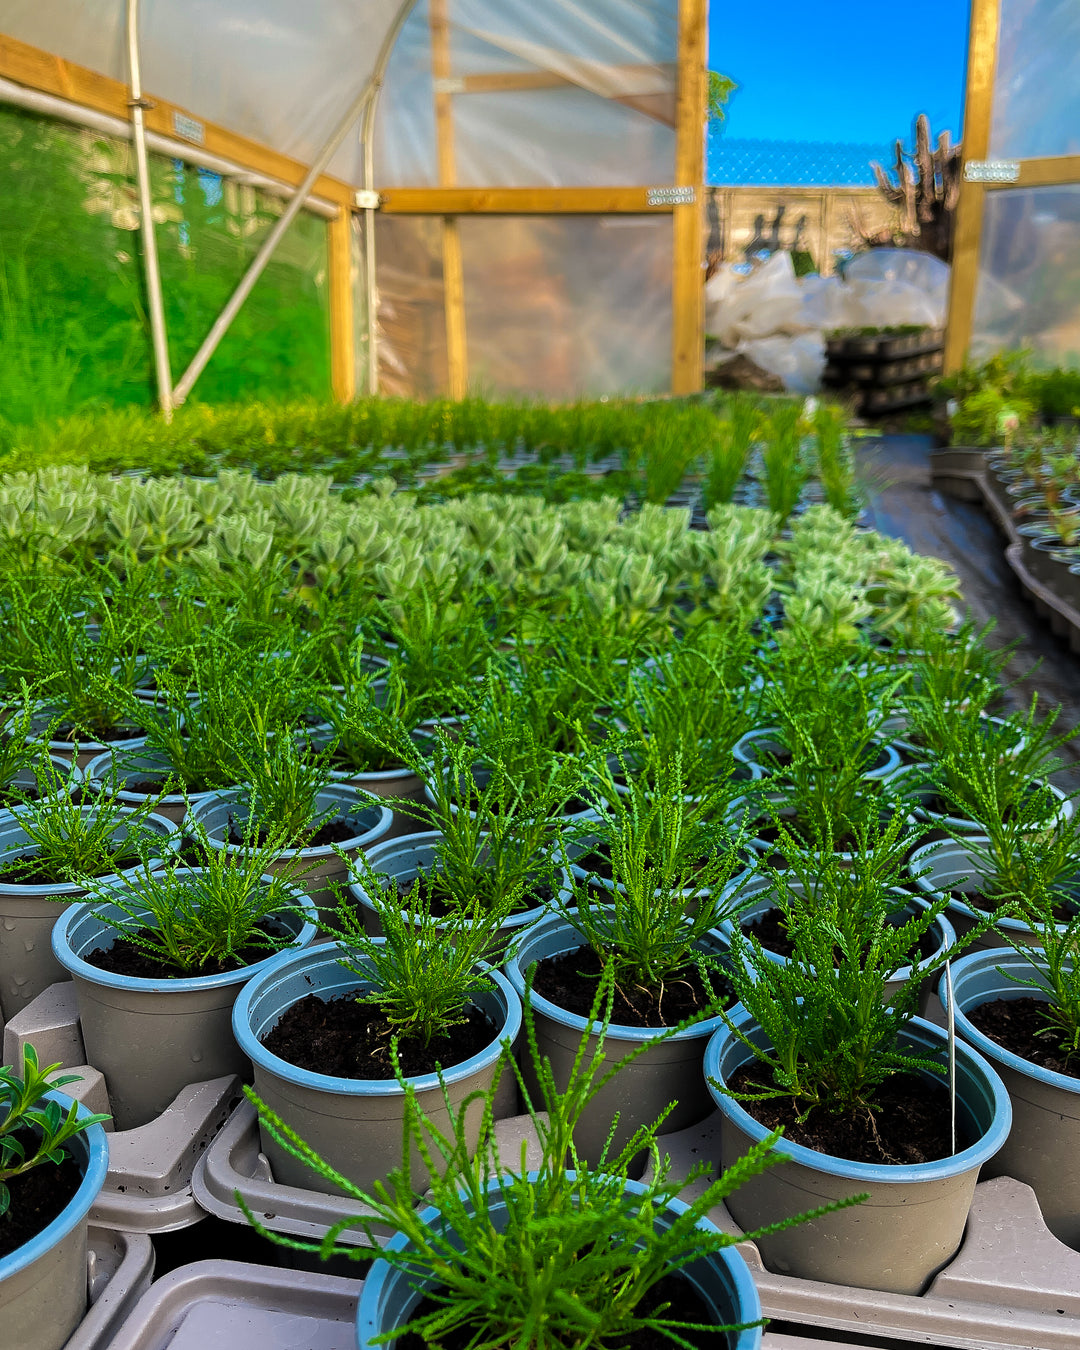 A large quantity of olive herb plants in pots